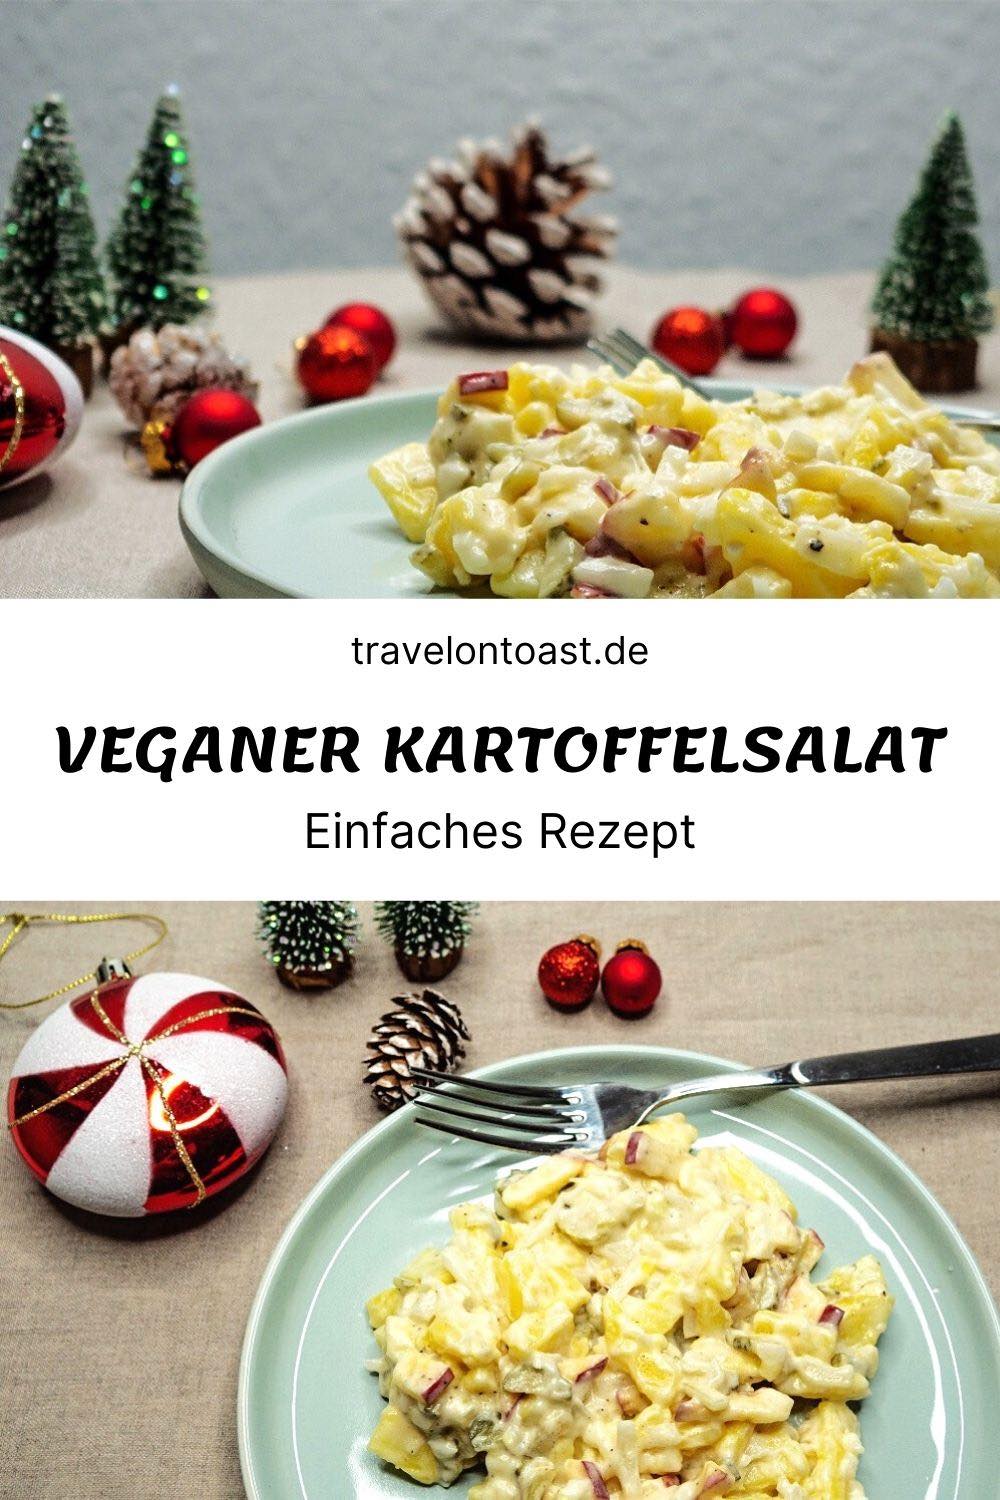 Vegan potato salad with mayonnaise, apple and pickles. The perfect potato salad recipe for Christmas or New Years Eve!